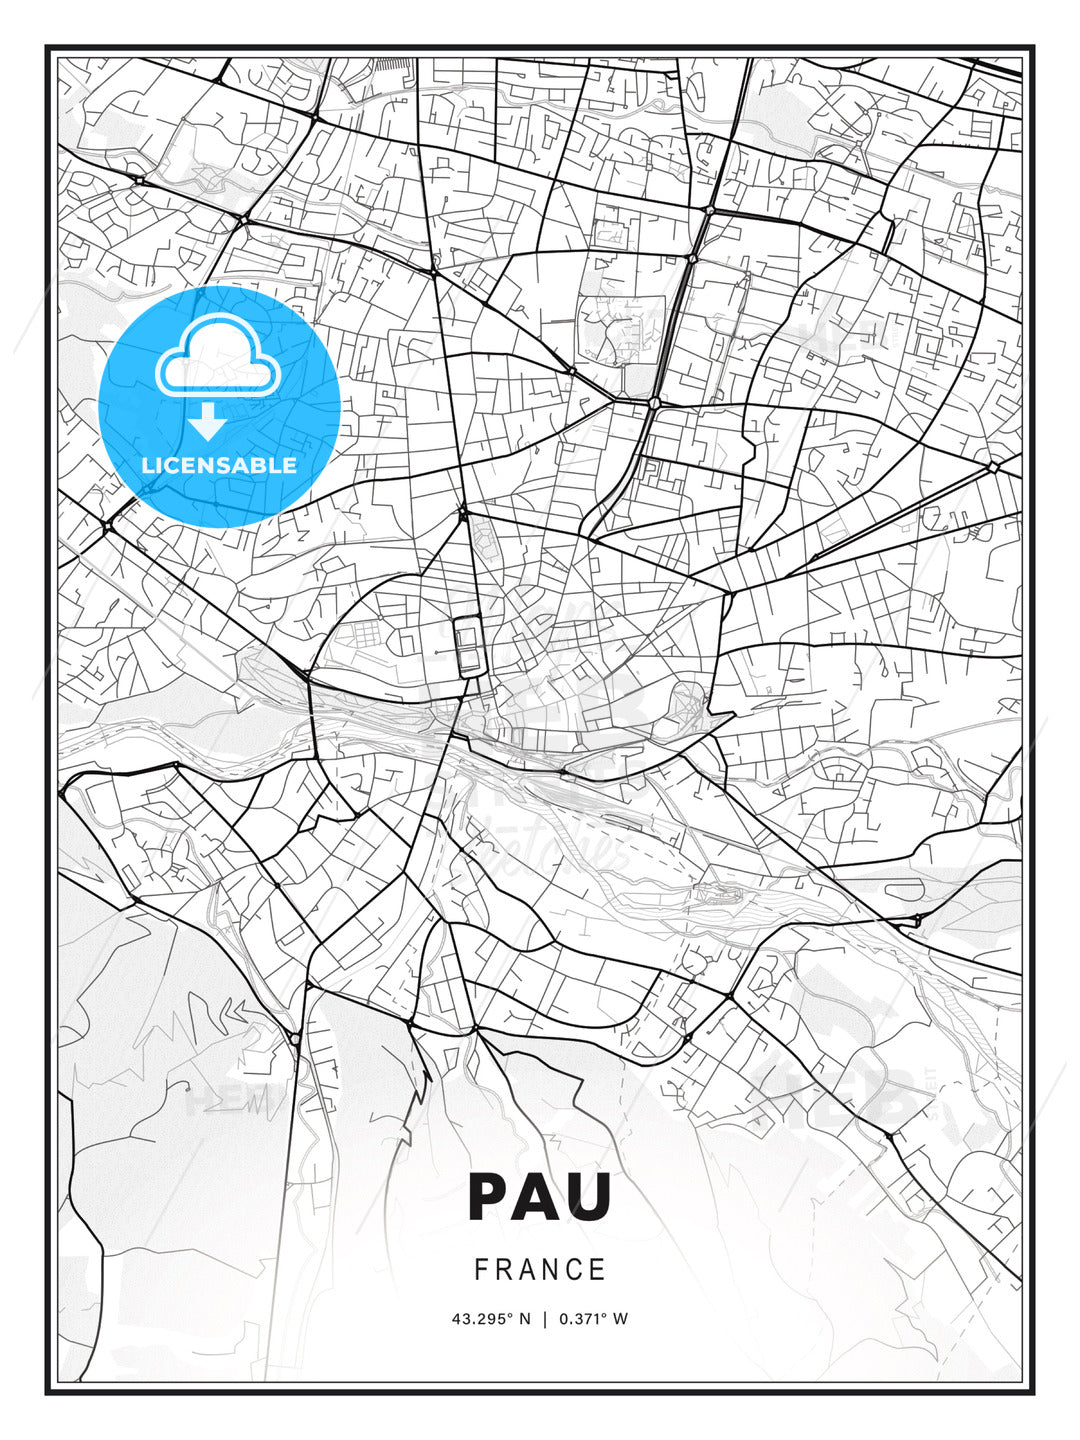 Pau, France, Modern Print Template in Various Formats - HEBSTREITS Sketches